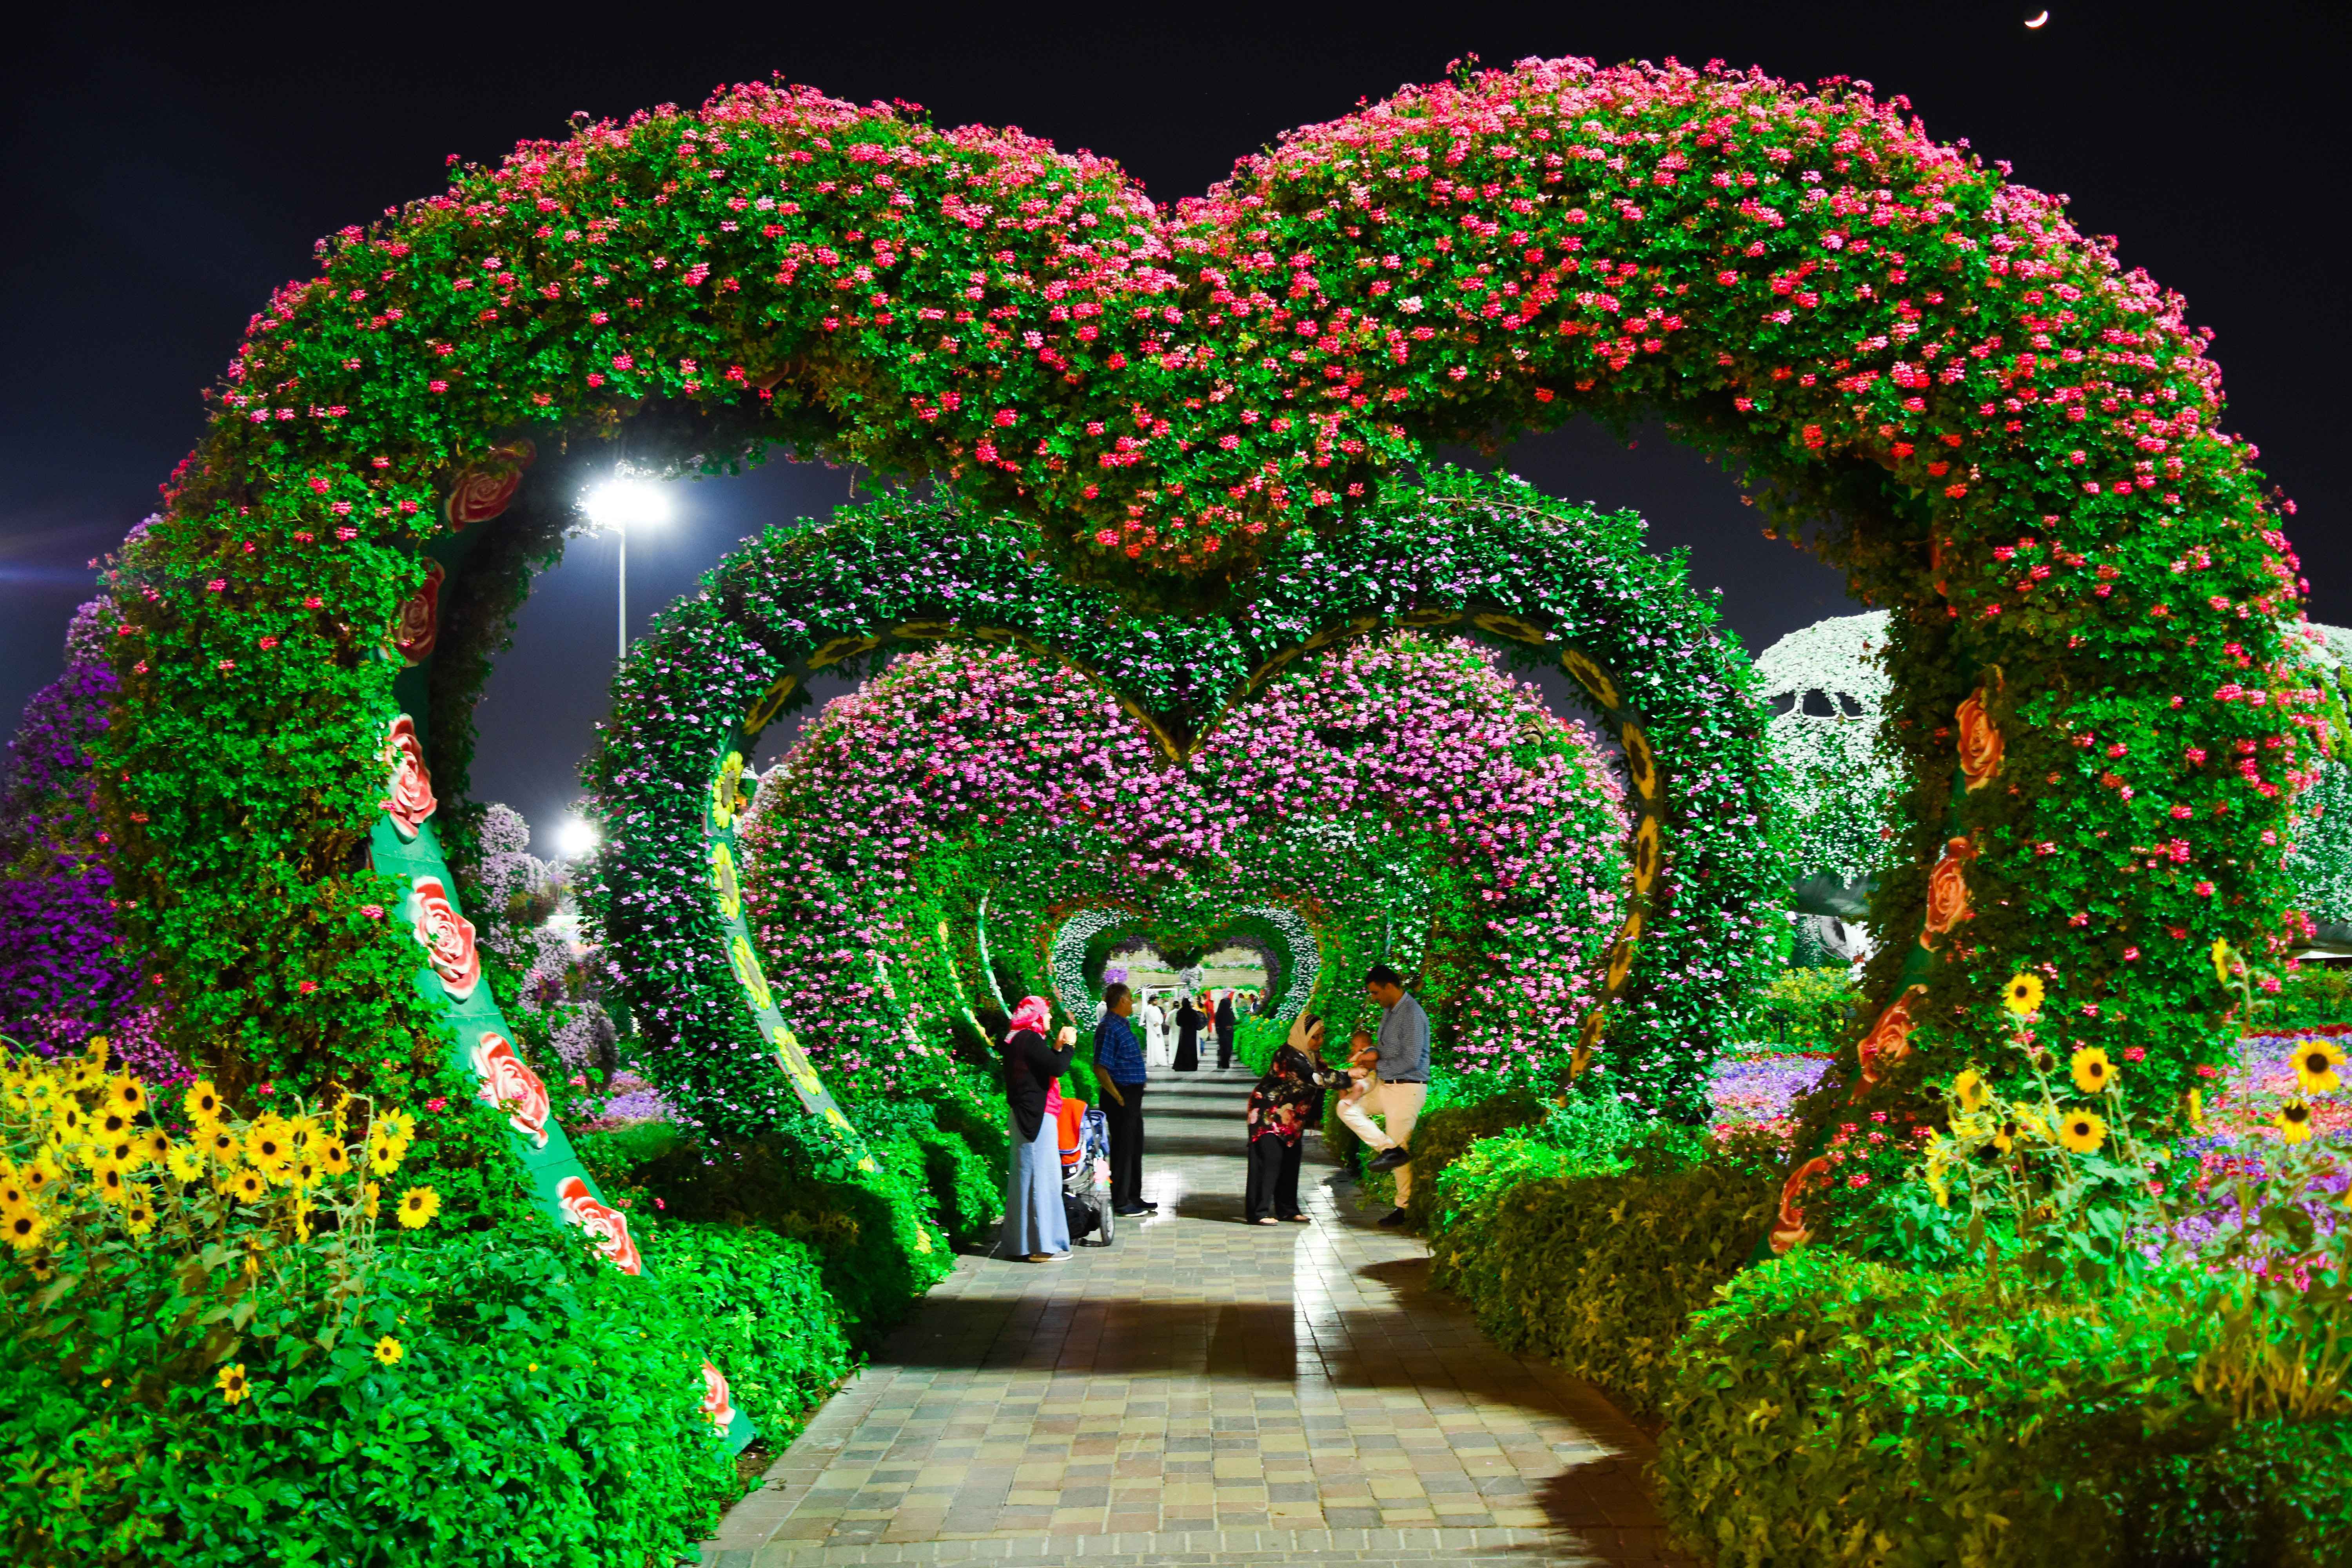 Experience The Diversity Of Flora And Fauna In Dubai- Miracle Garden Plus Butterfly Garden